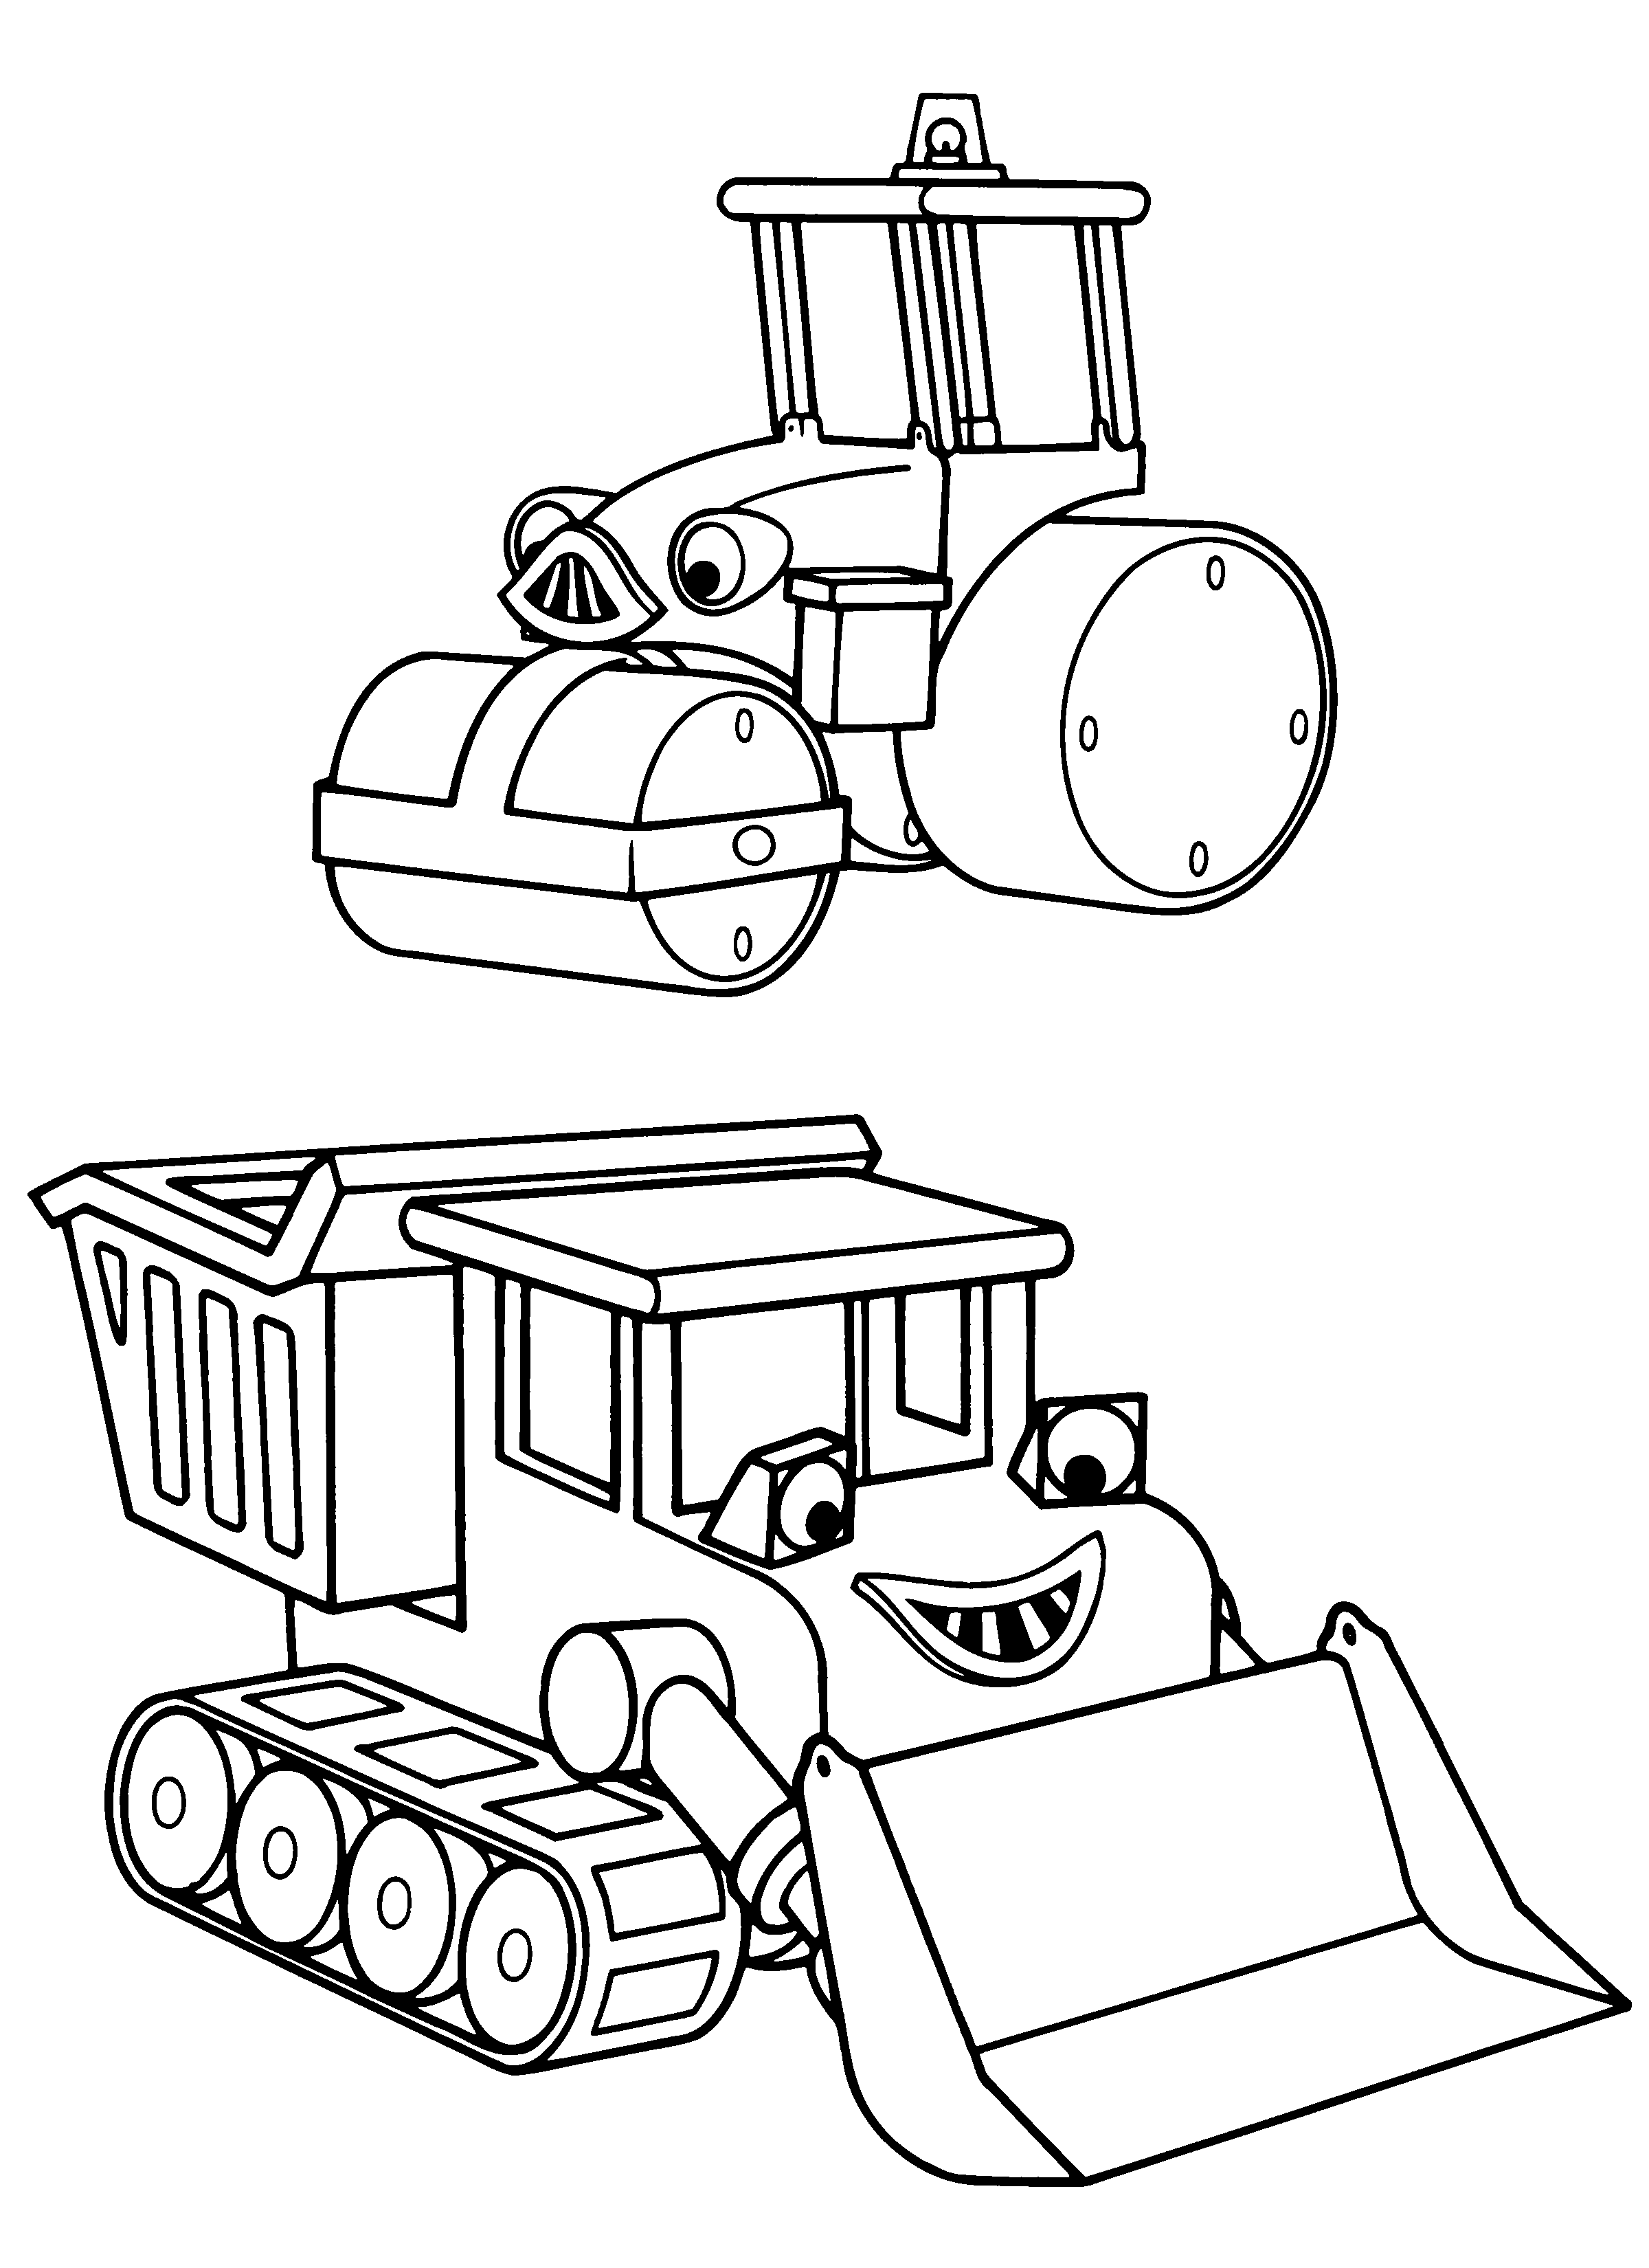 coloring-page-bob-the-builder-coloring-pages-44